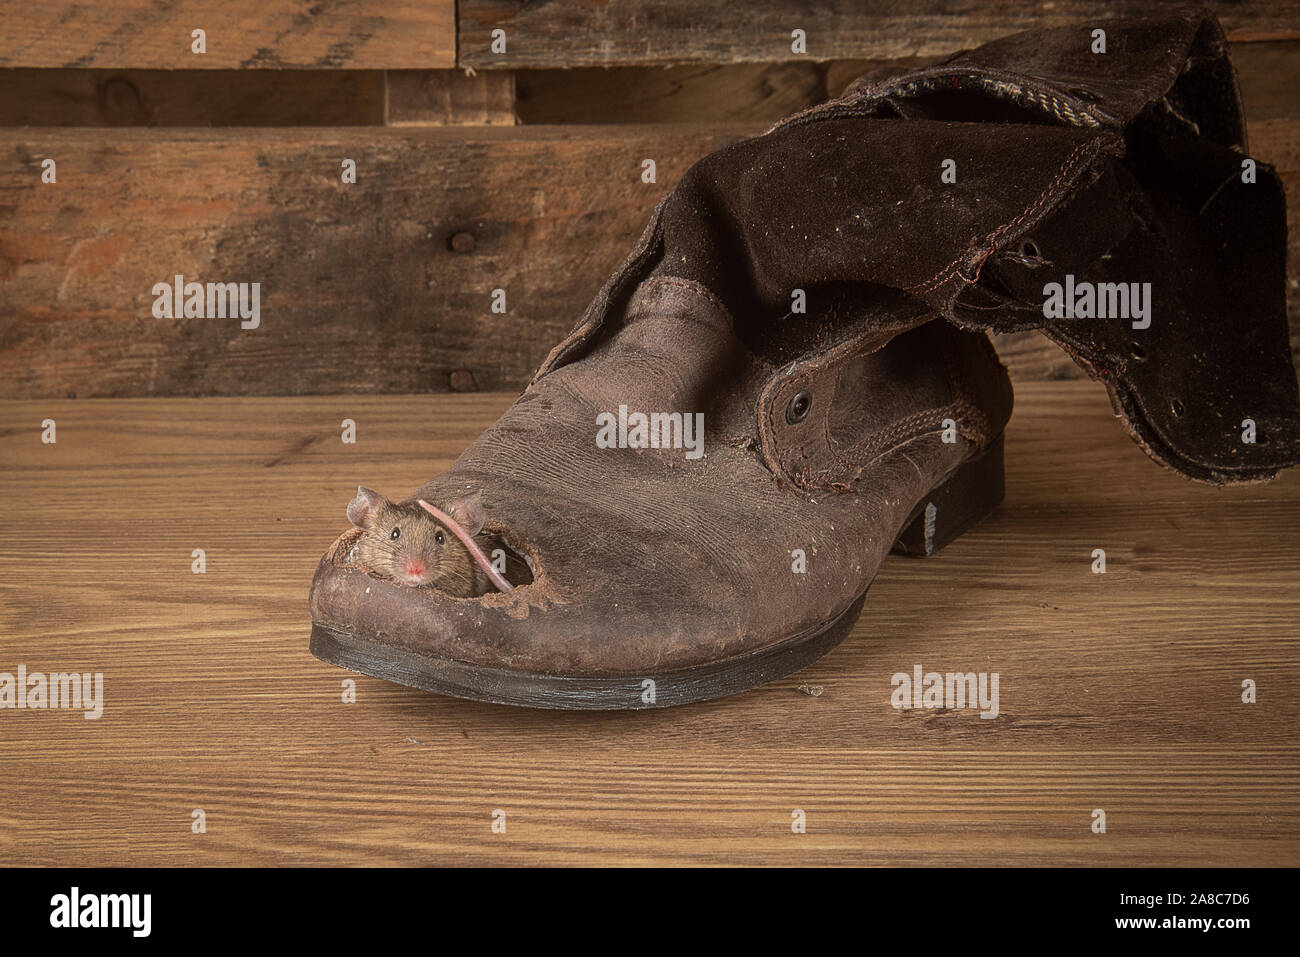 A small mouse is peering out of a hole in the toe of an old leather an old boot.  the base and background are wood and there is copy space around Stock Photo